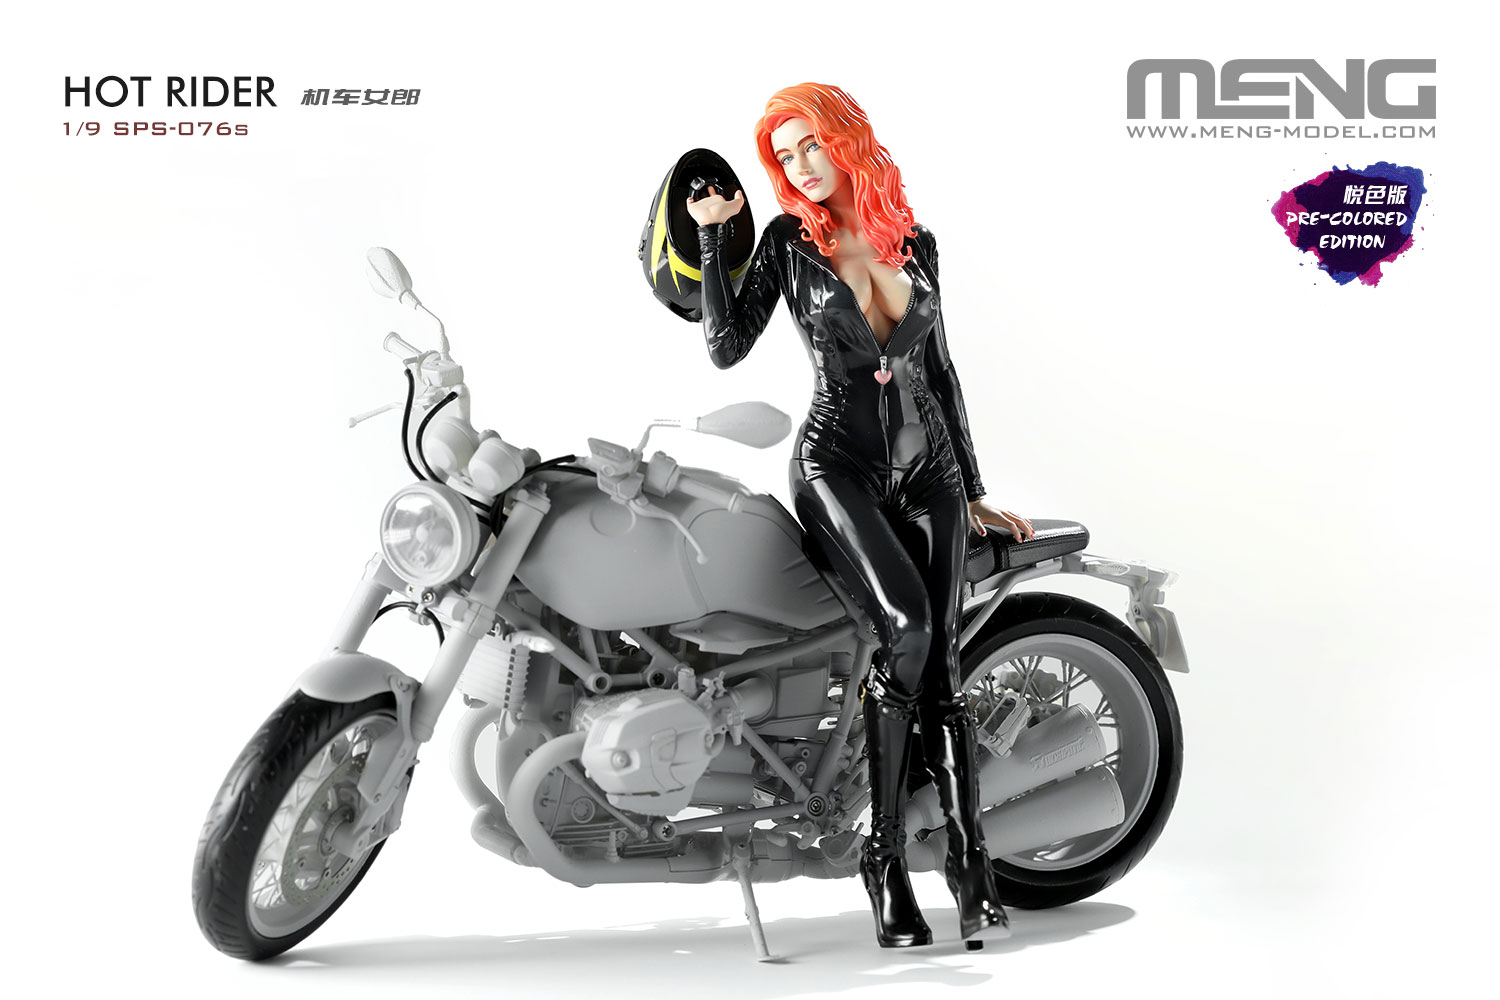 Fotografie 1/9 Hot Rider (Resin) (Pre-colored Edition, Assembled Figure)